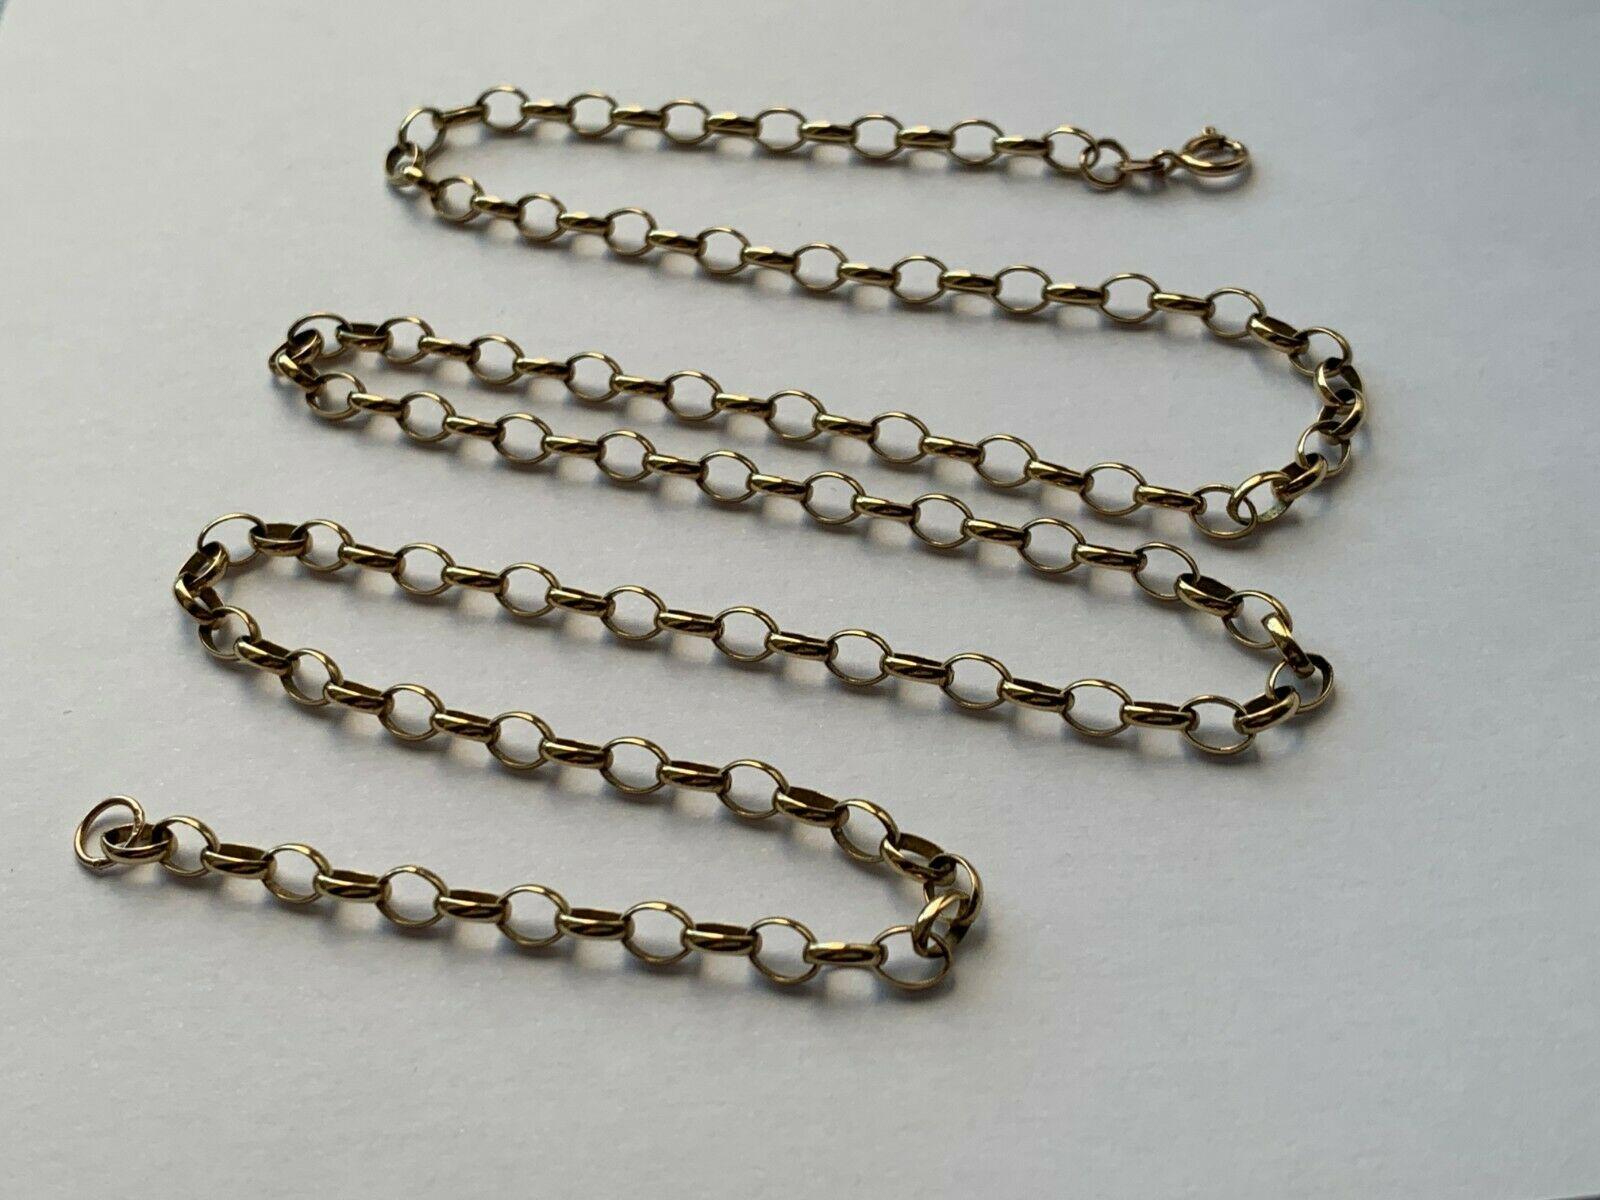 9ct 375 Gold Long Link Chain 
Vintage darker patina
Length 24 Inches 
Thickness 3mm
Weight 9.75 grams

Sku : B443569